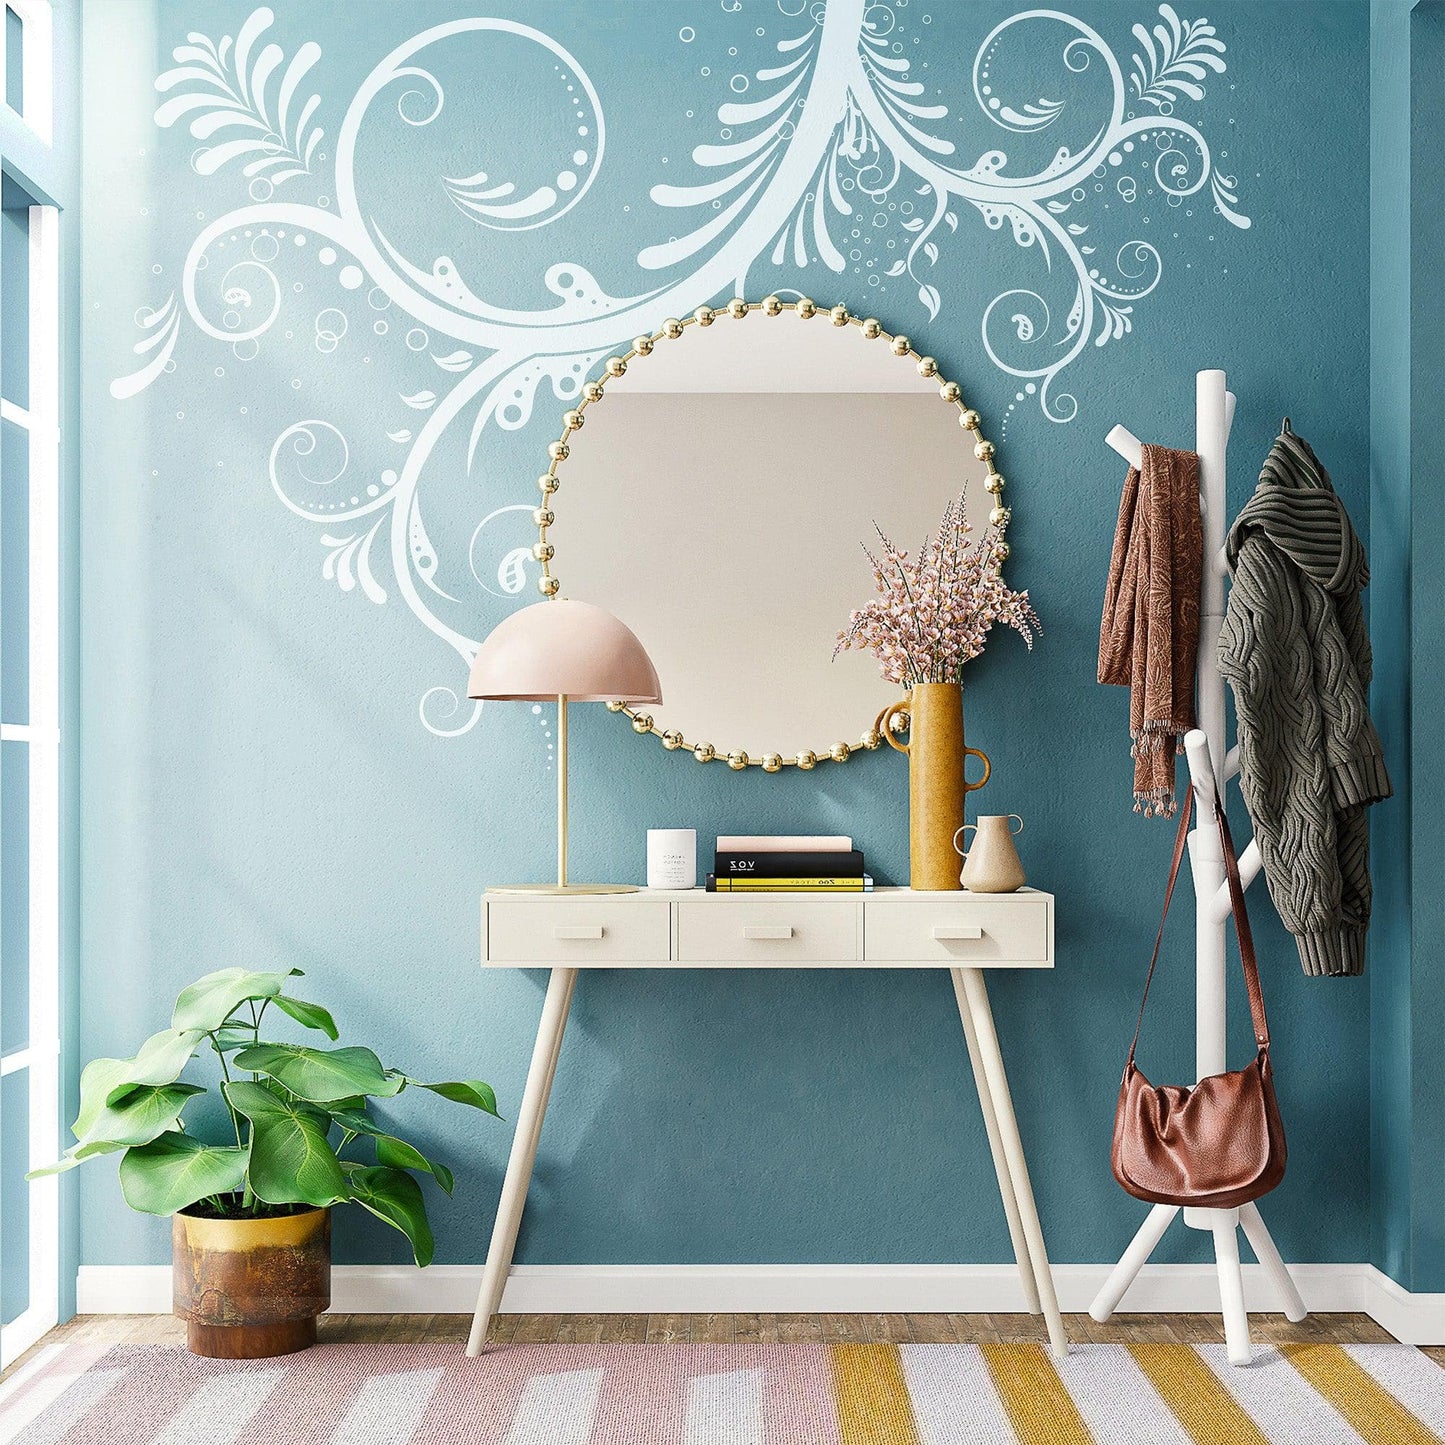 A white floral swirl decal on a blue wall above a mirror in a bedroom. 